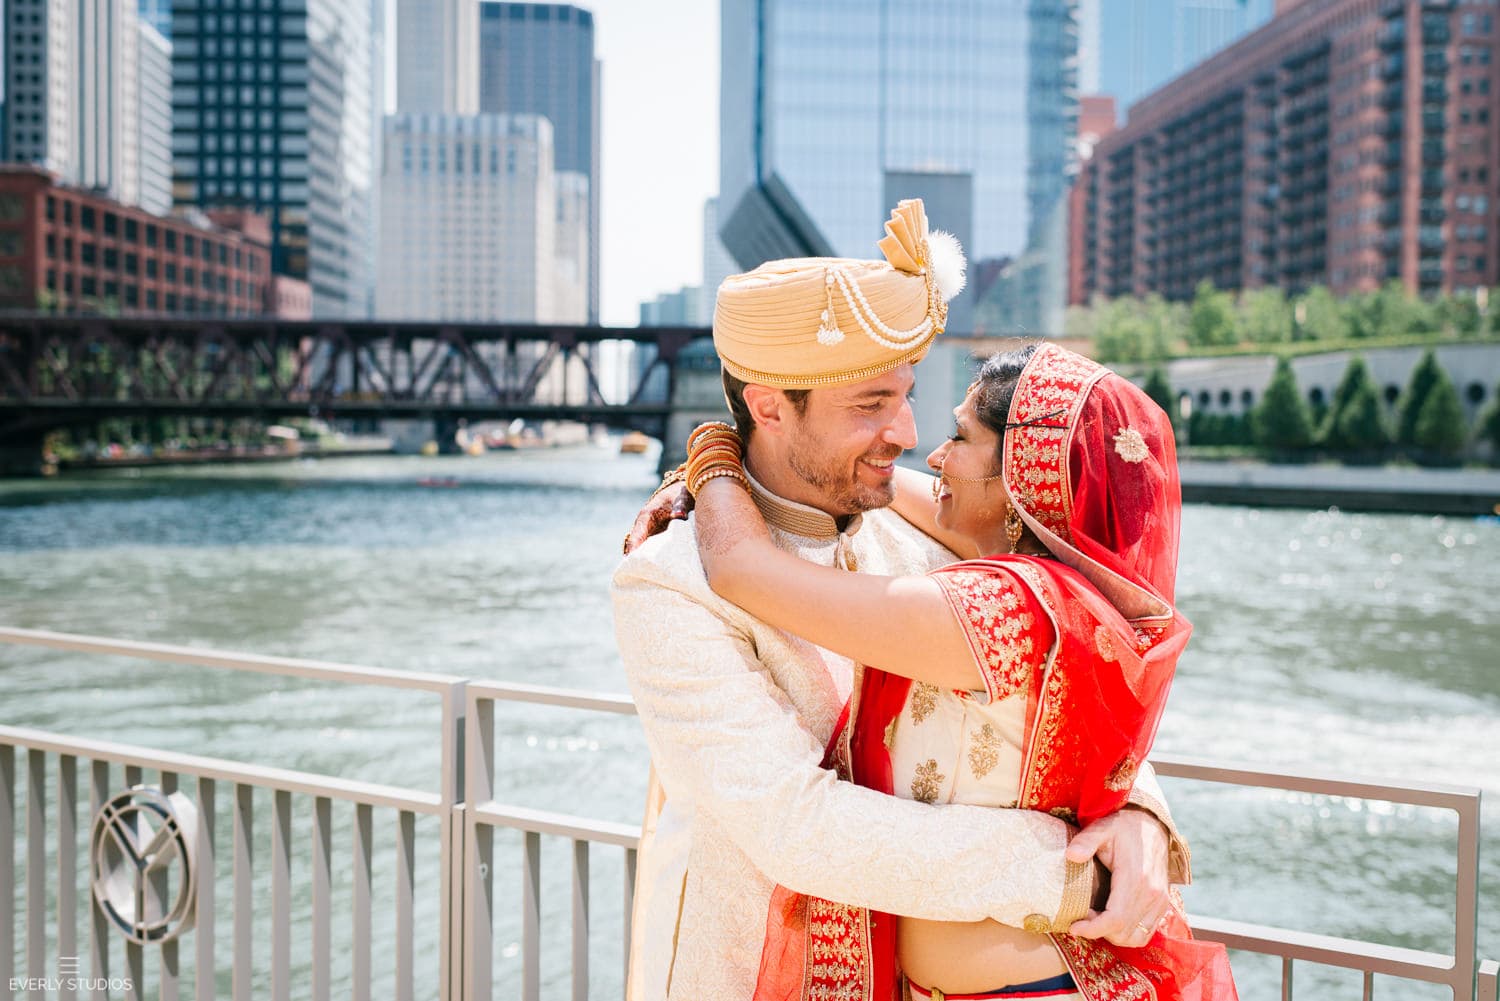 Wolf Point Ballroom wedding in Chicago. Photography by Indian wedding photographer NYC Everly Studios, www.everlystudios.com